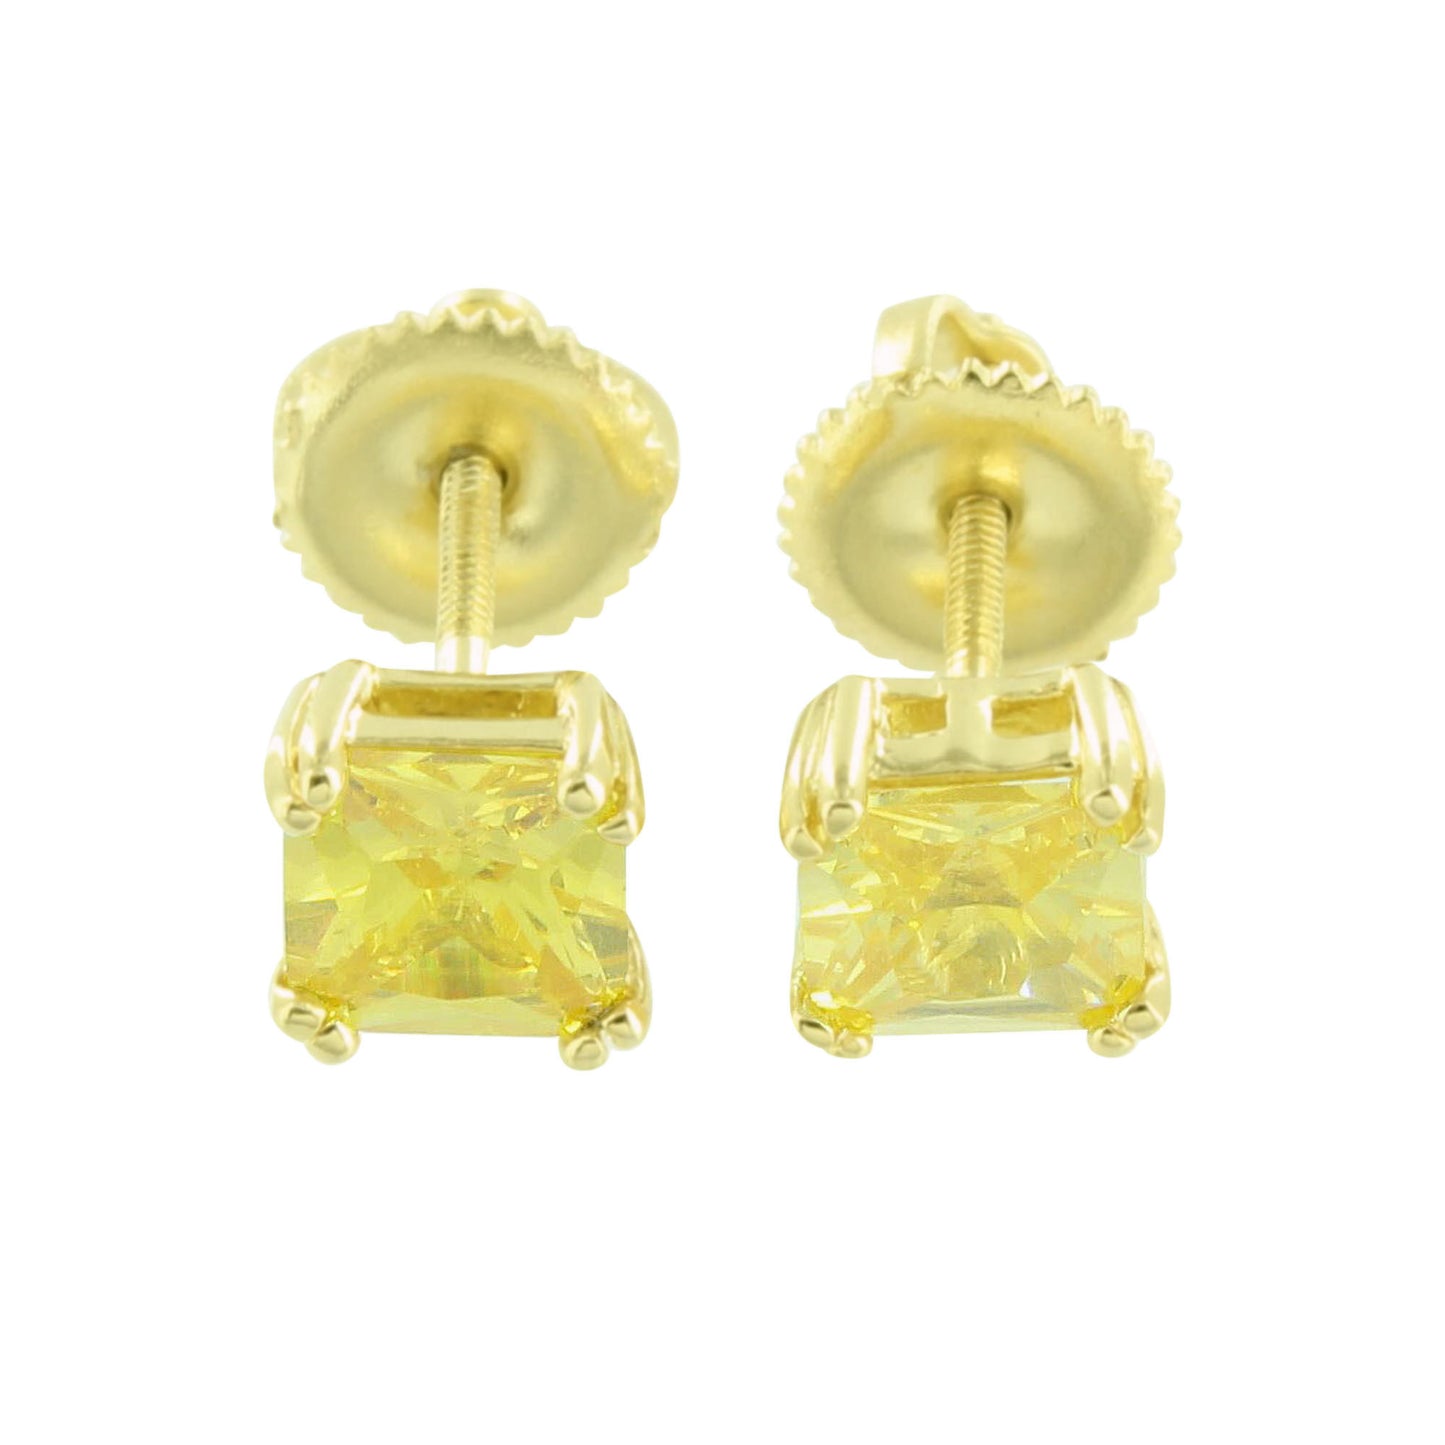 Canary Earrings Yellow Gold Finish Screw Back Studs